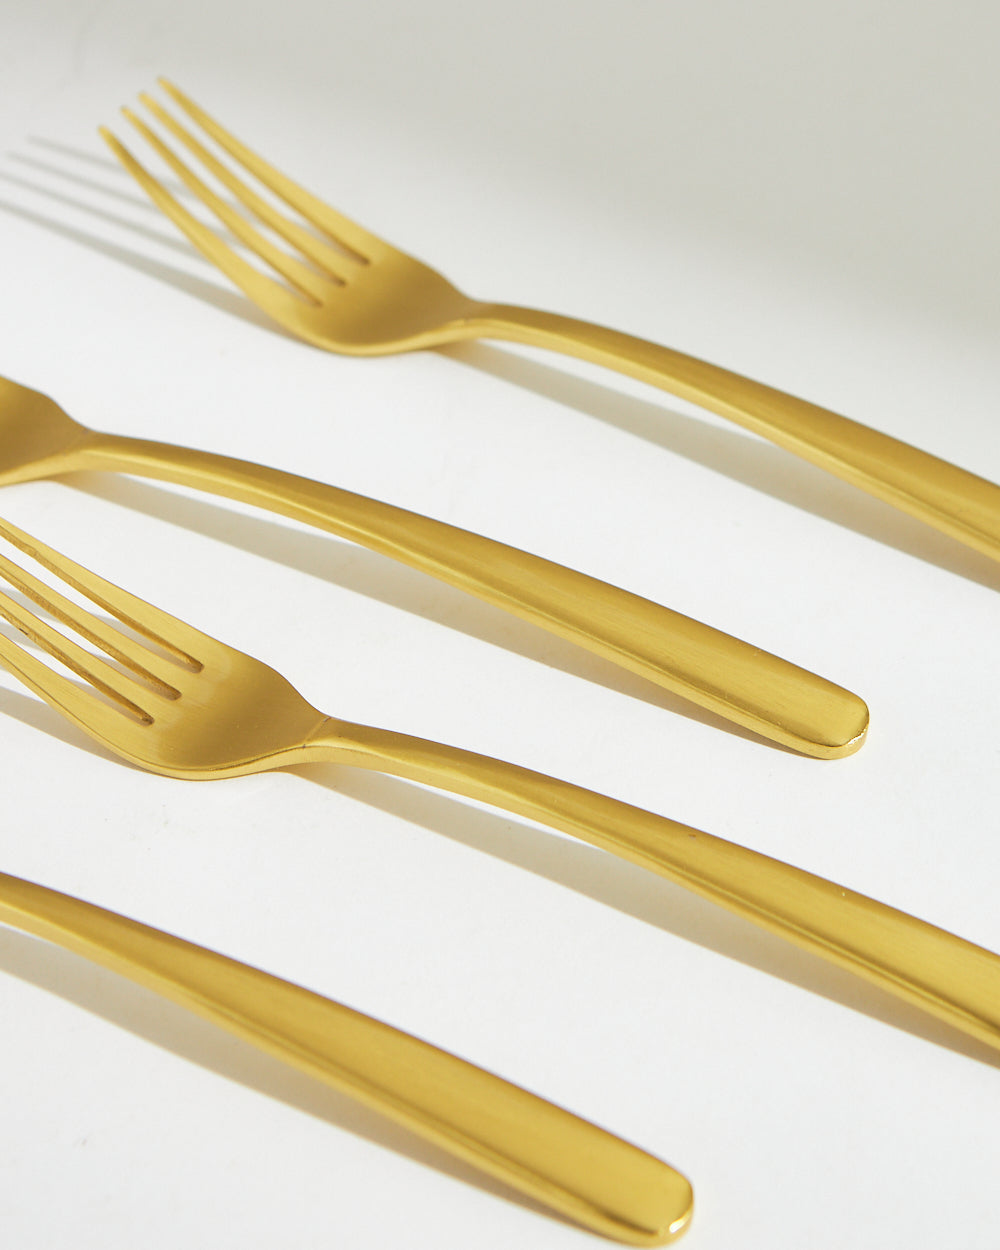 Classic Gold Meal Forks - Set of 4